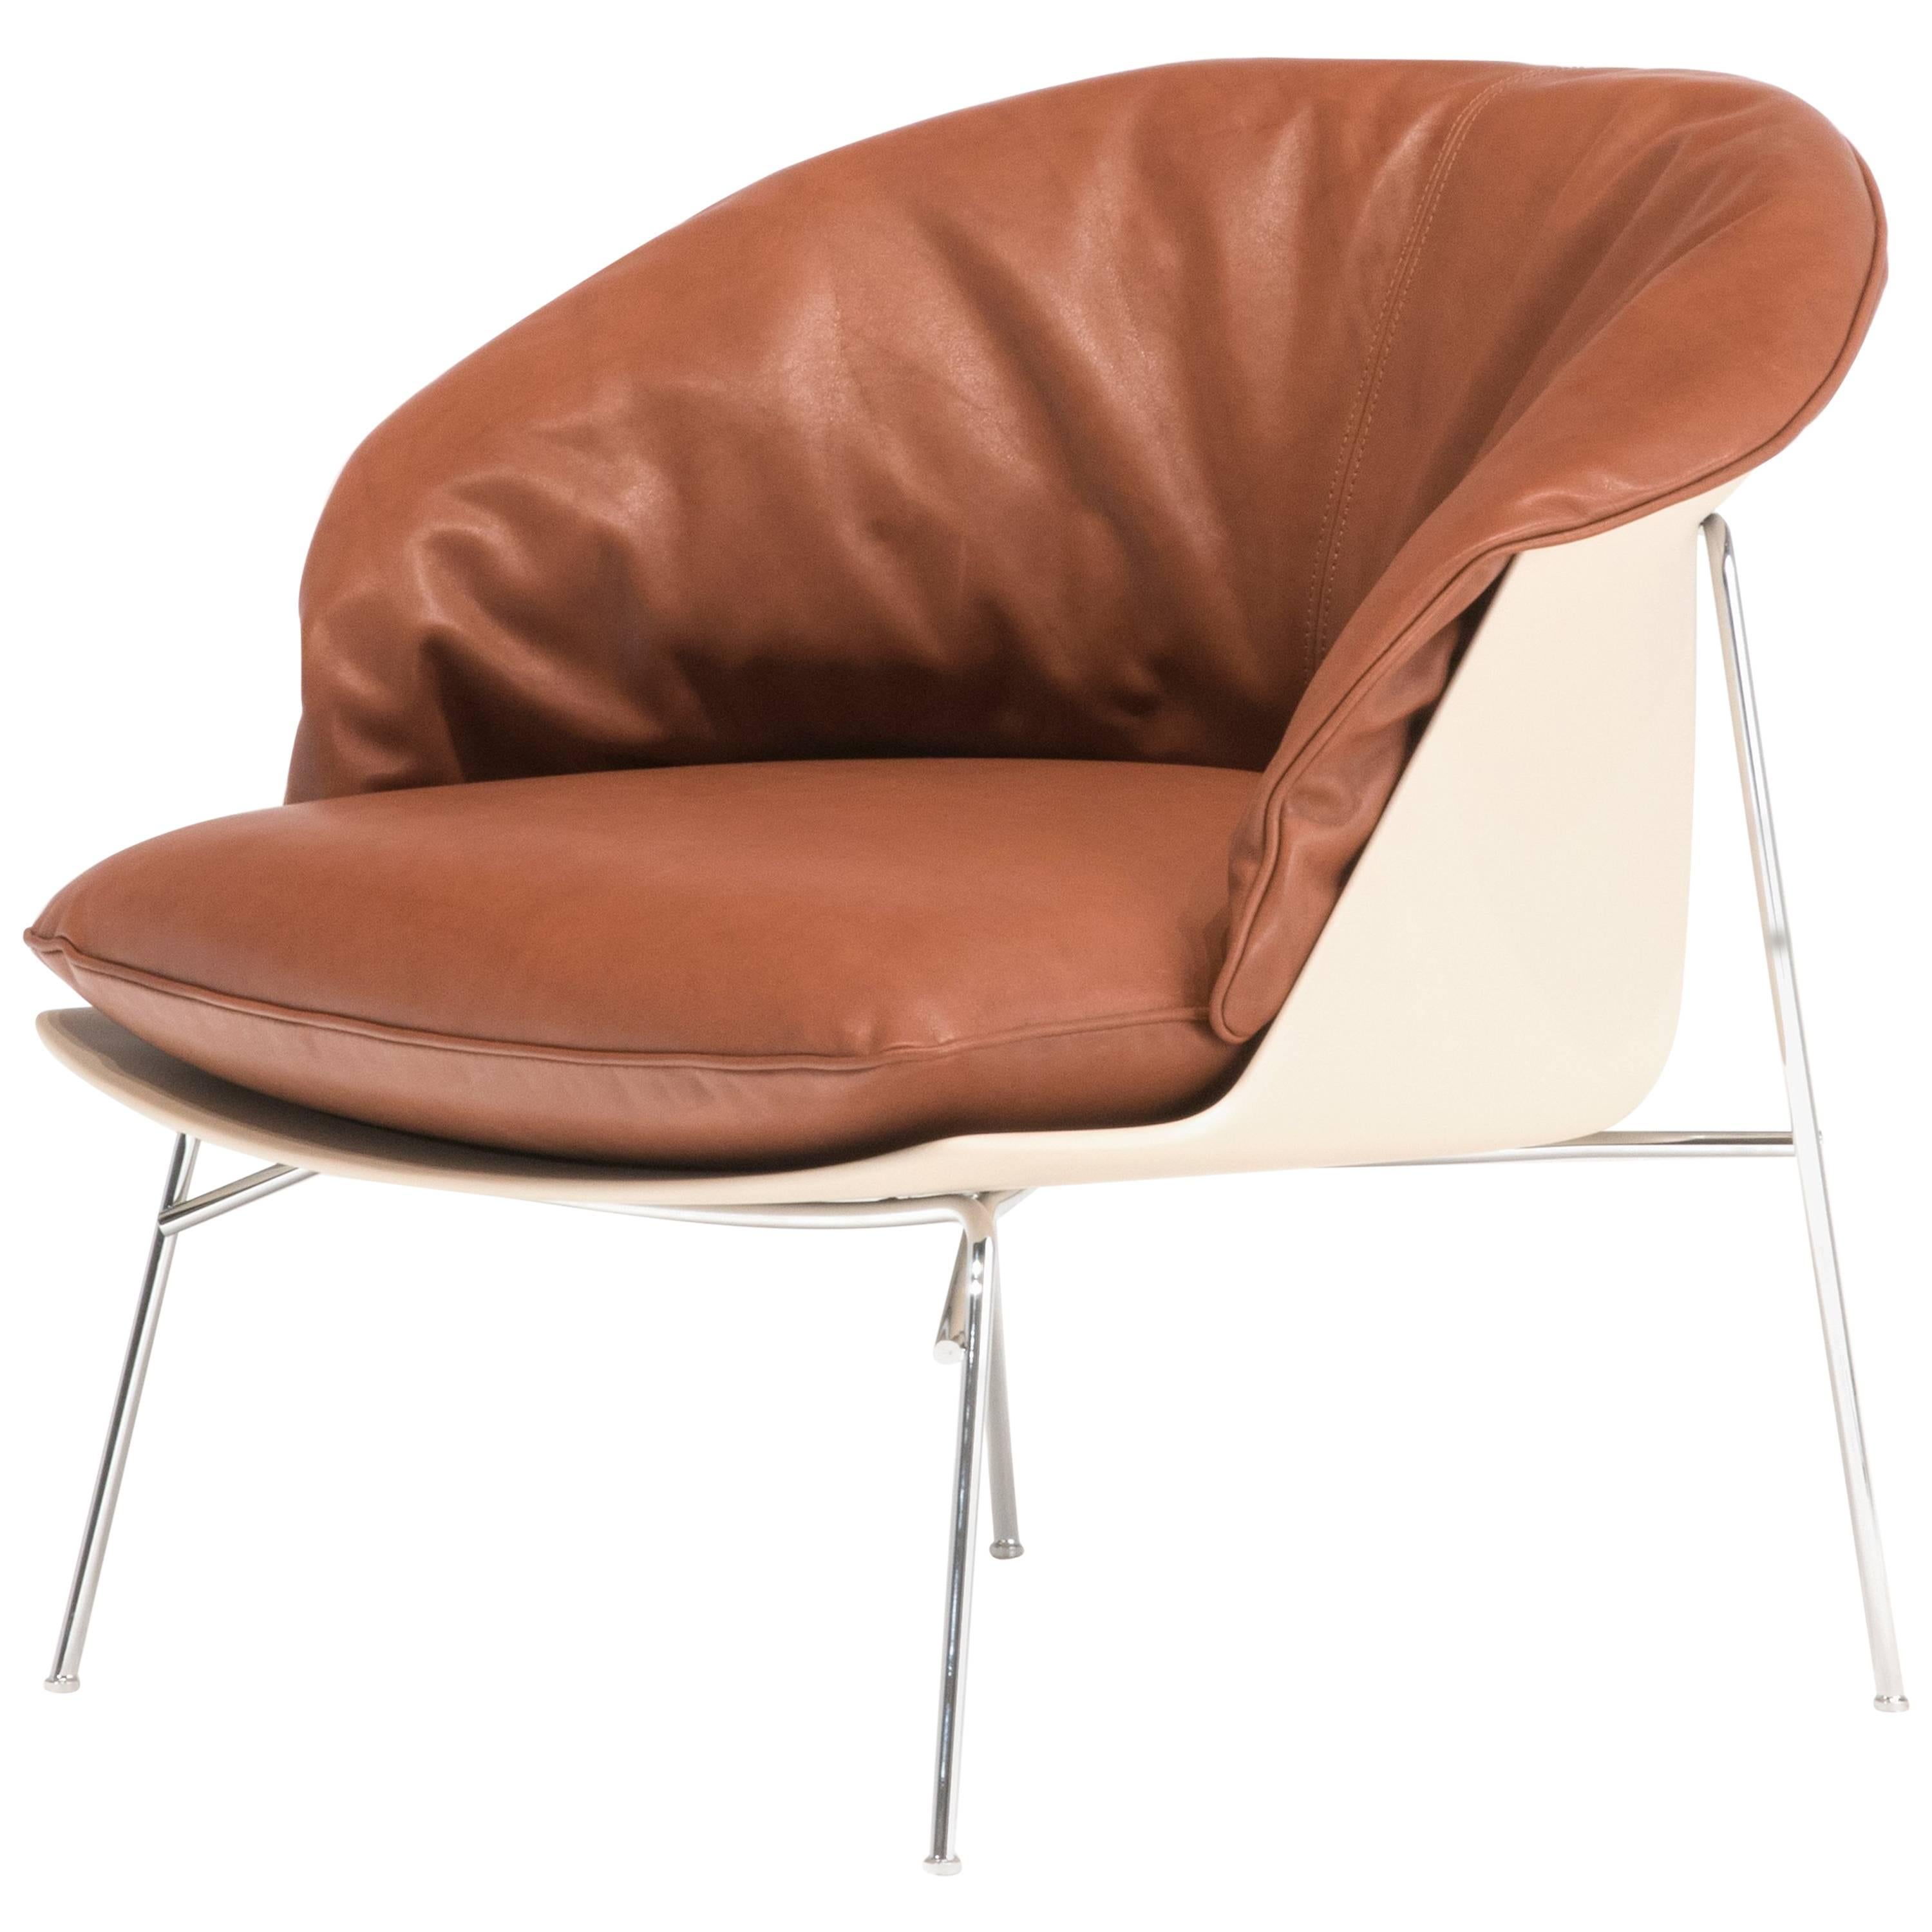 Moon Armchair in Beige with Brown Leather Cushion by Ludovica & Roberto Palomba For Sale